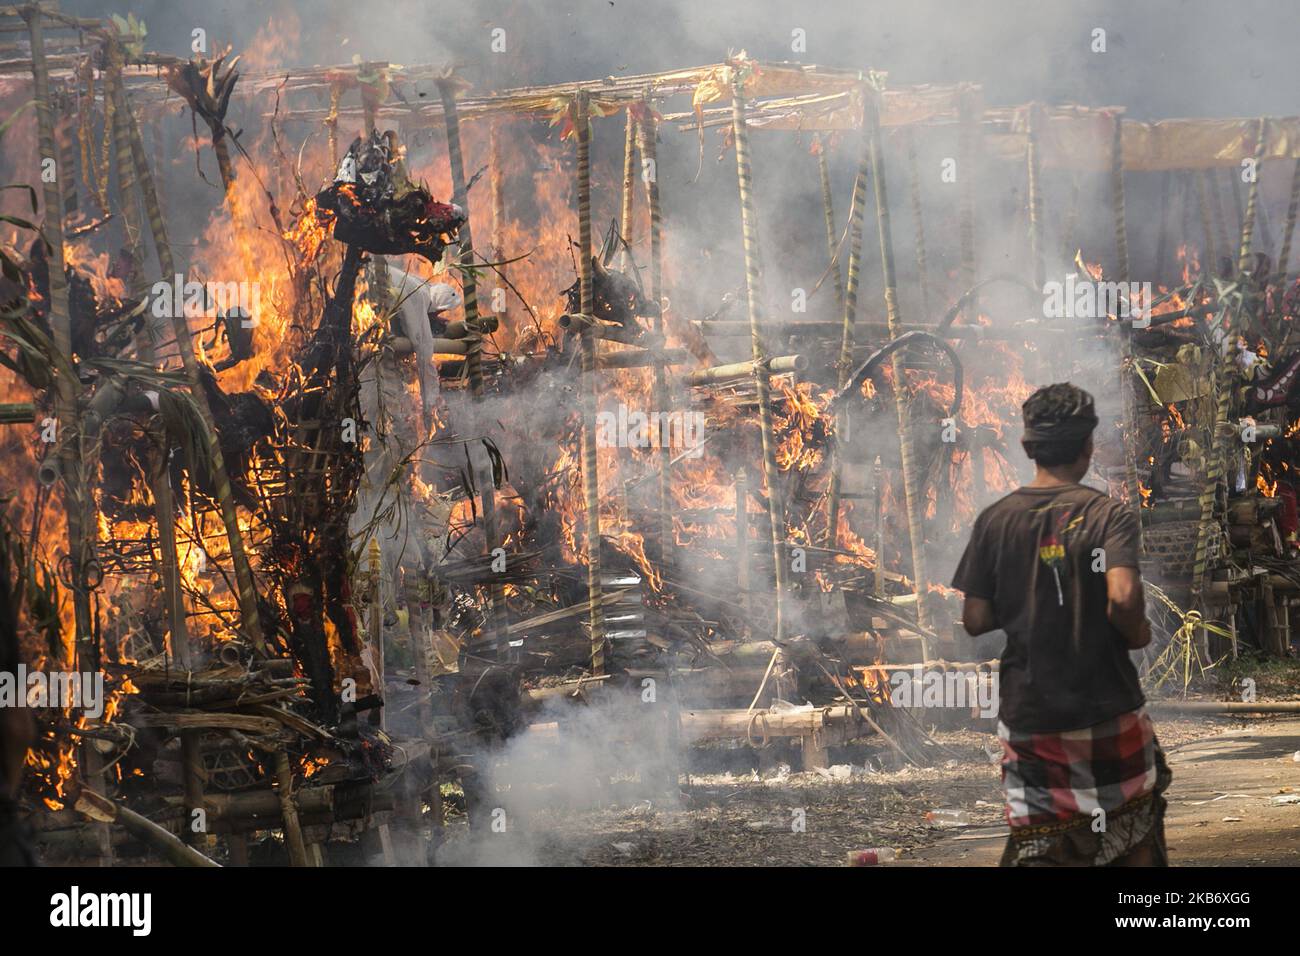 Coffin in shape of mythical dragon and bull being burnt during mass cremation or locally called Ngaben rituals in the grave yard of Bayad Village in Tegallalang, Gianyar, Bali on September 25, 2019. A total of 59 bodies in the form of human skeletons that died several years ago were cremated simultaneously in order to ease the cost of the ceremony for local residents. (Photo by Johanes Christo/NurPhoto) Stock Photo